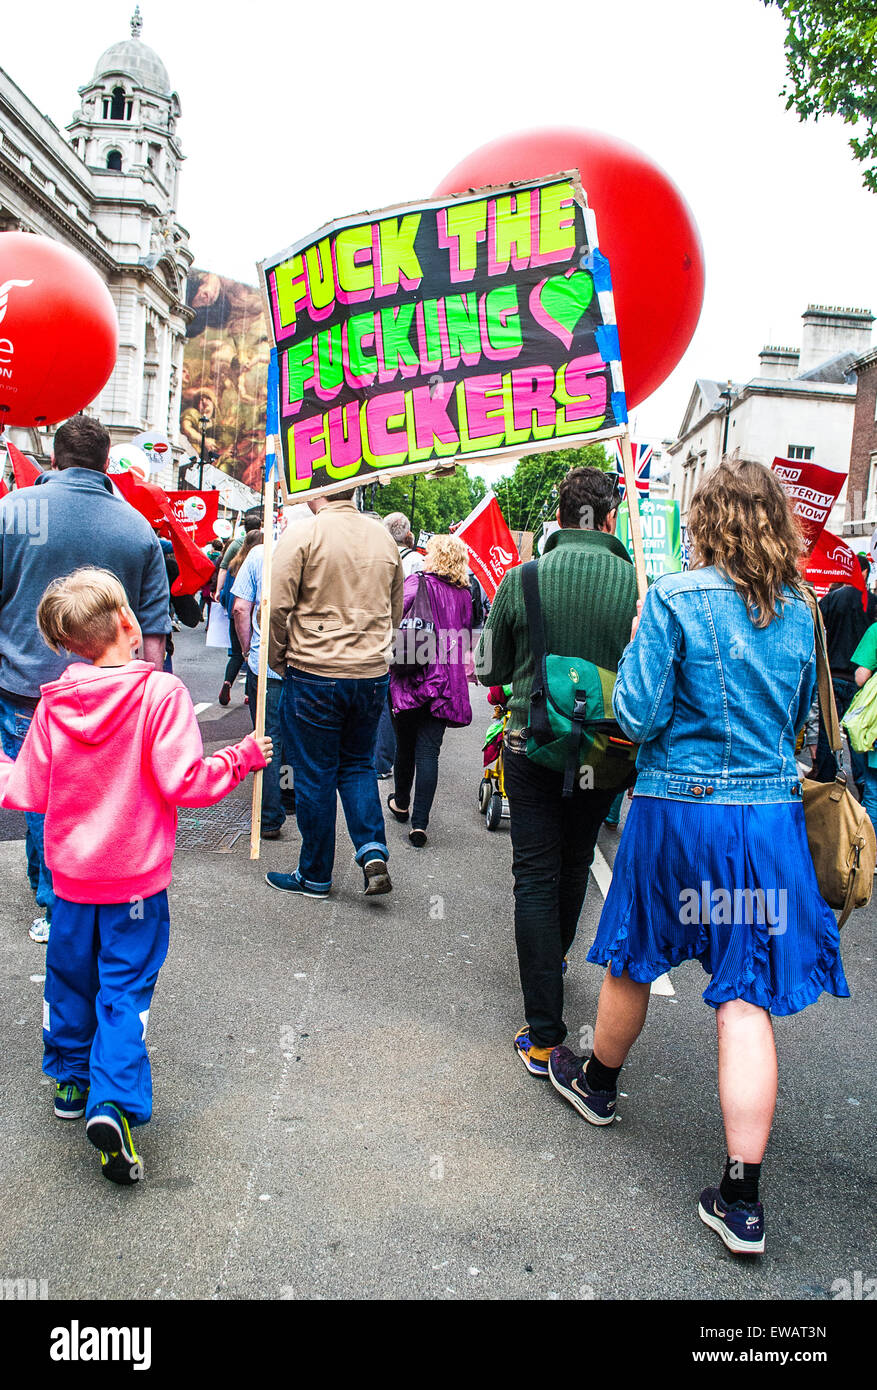 Protesters carrying an angry sign at the London Protest against Austerity. Stock Photo